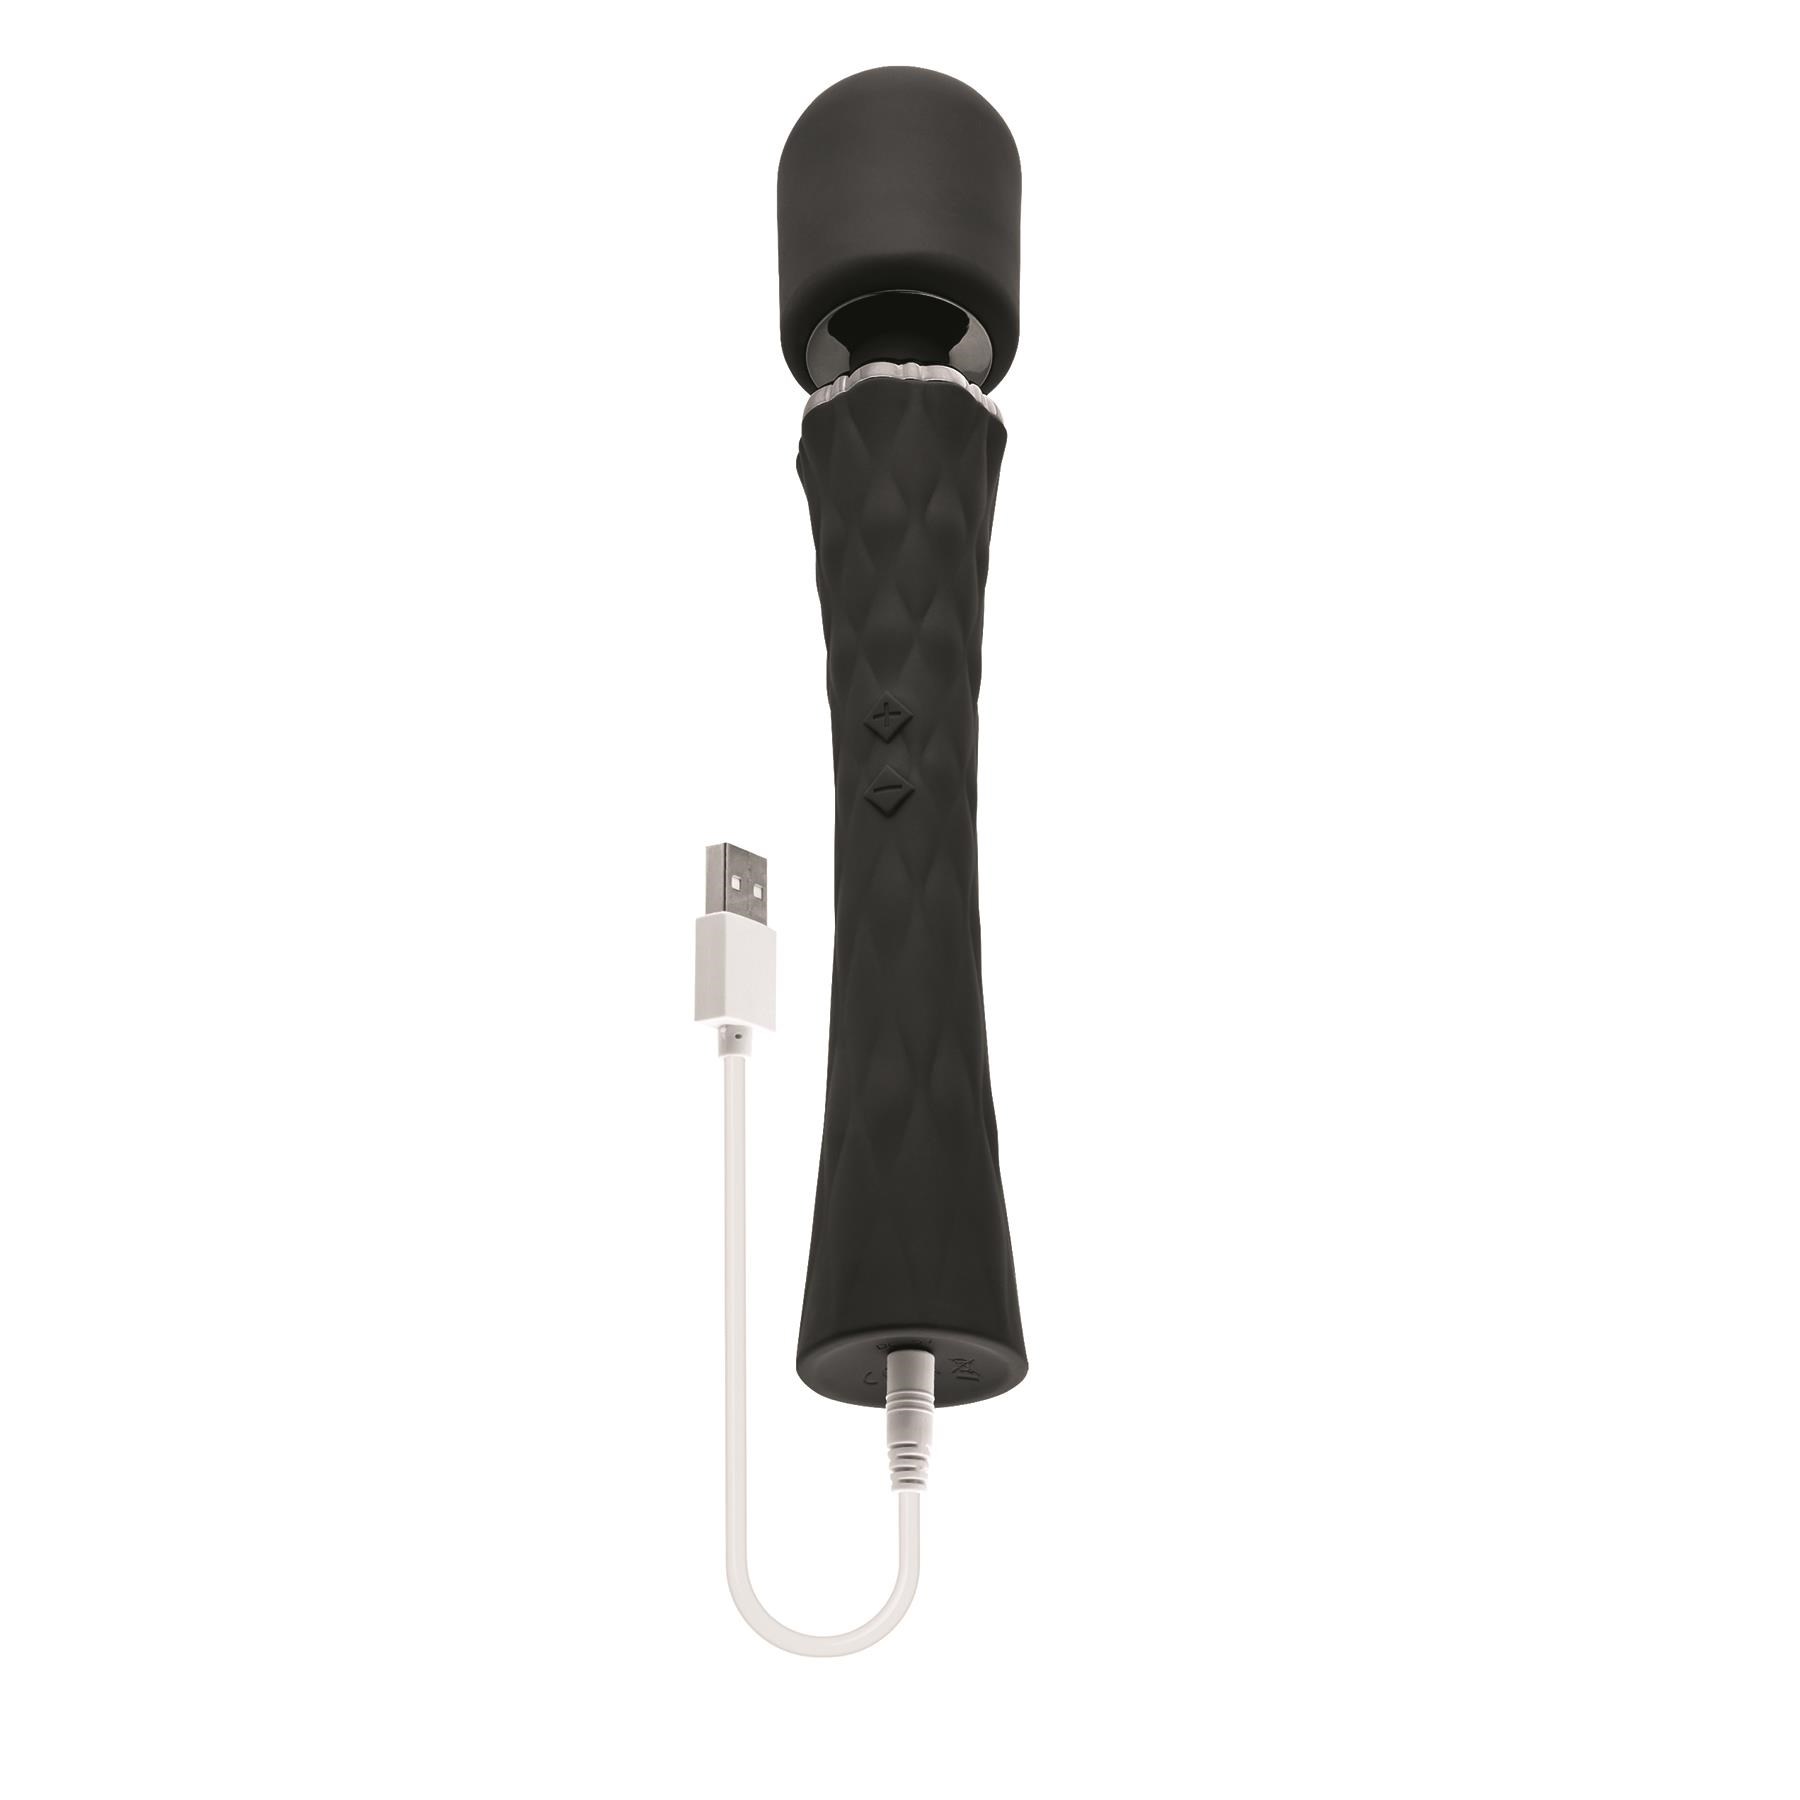 Playboy Pleasure Royal Wand Massager - Product Shot Showing Where Charging Cable is Placed